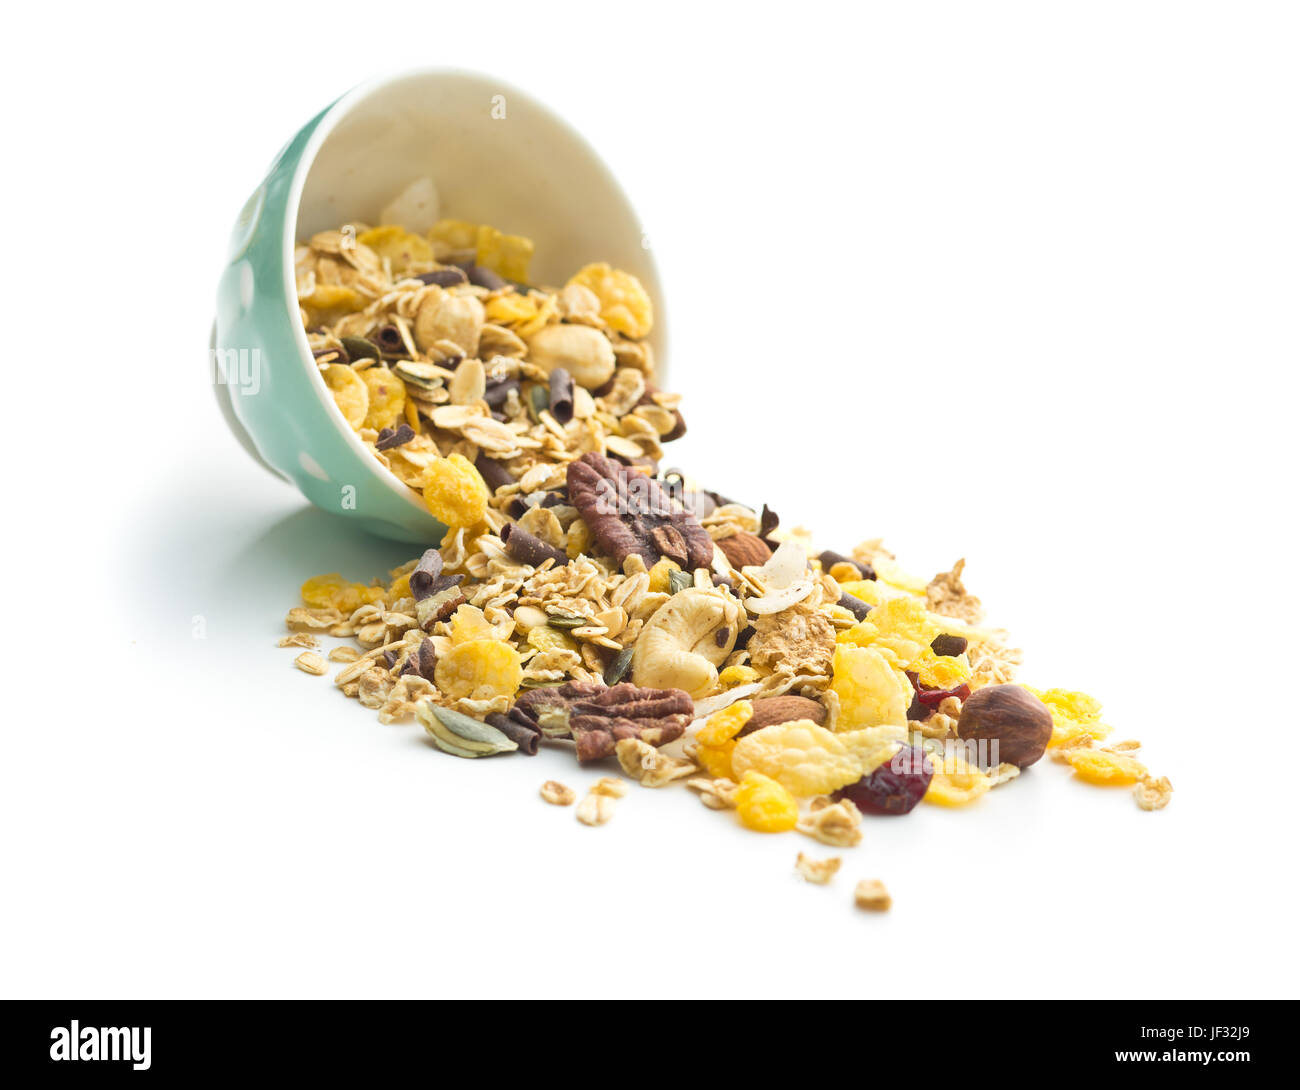 Tasty homemade muesli with nuts in bowl isolated on white background. Stock Photo